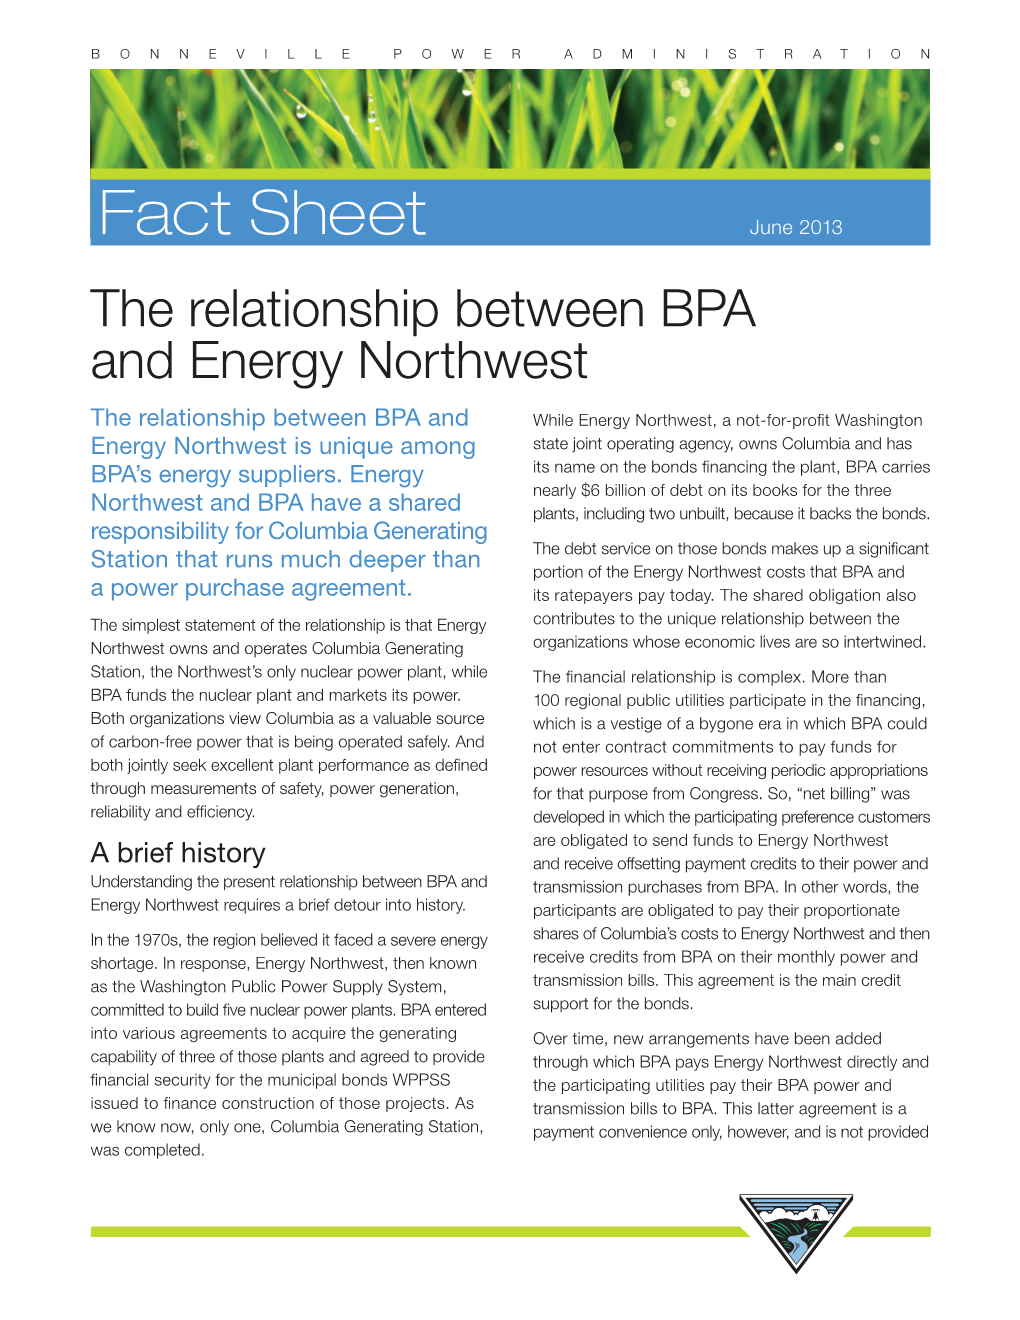 The Relationship Between BPA and Energy Northwest